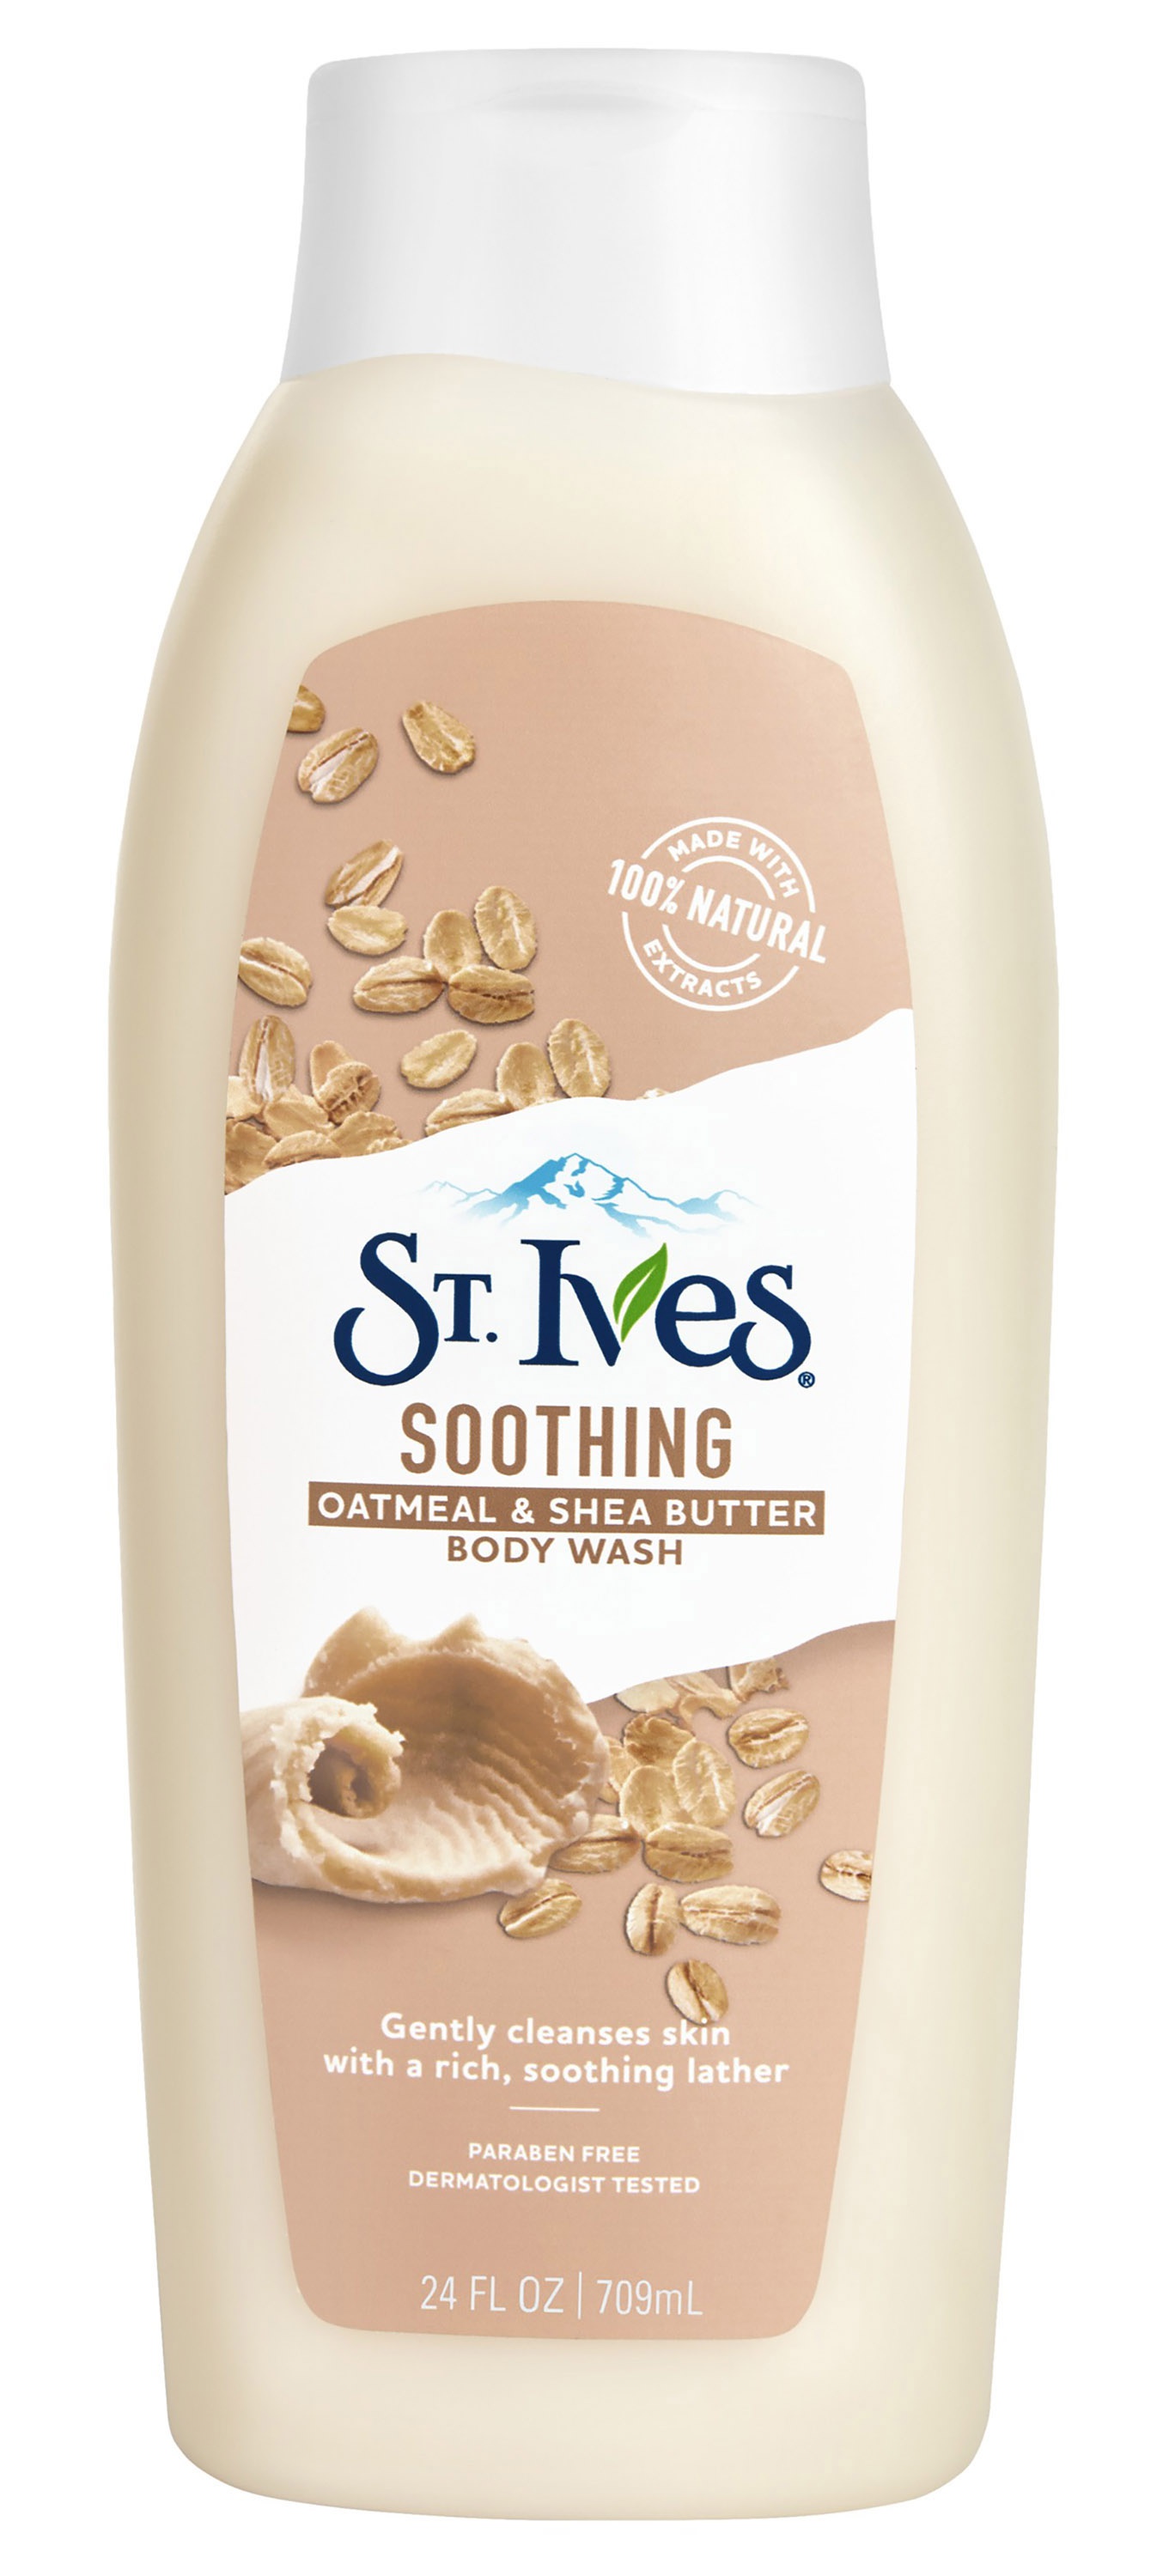 St Ives Soothing Body Wash Oatmeal and Shea Butter